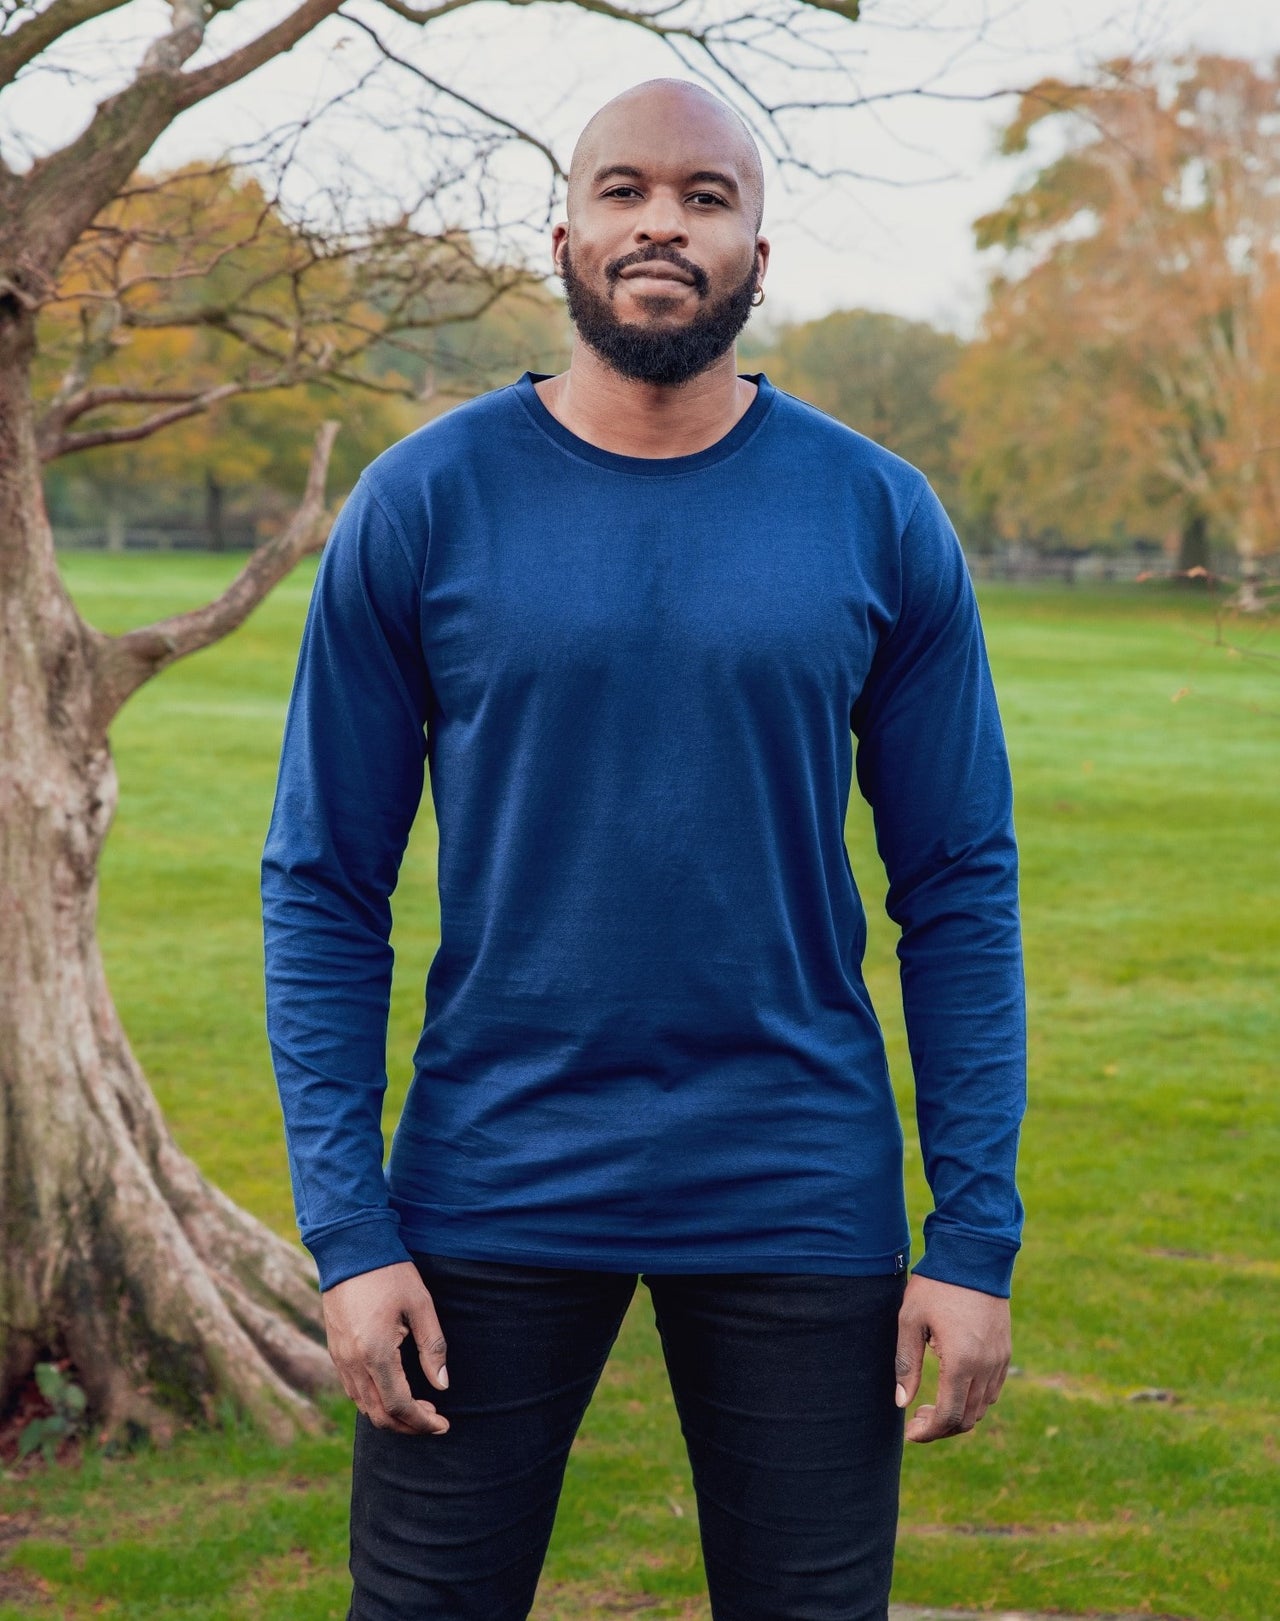 A tall athletic guy wearing a long sleeve navy tall t-shirt and smiling in a park.